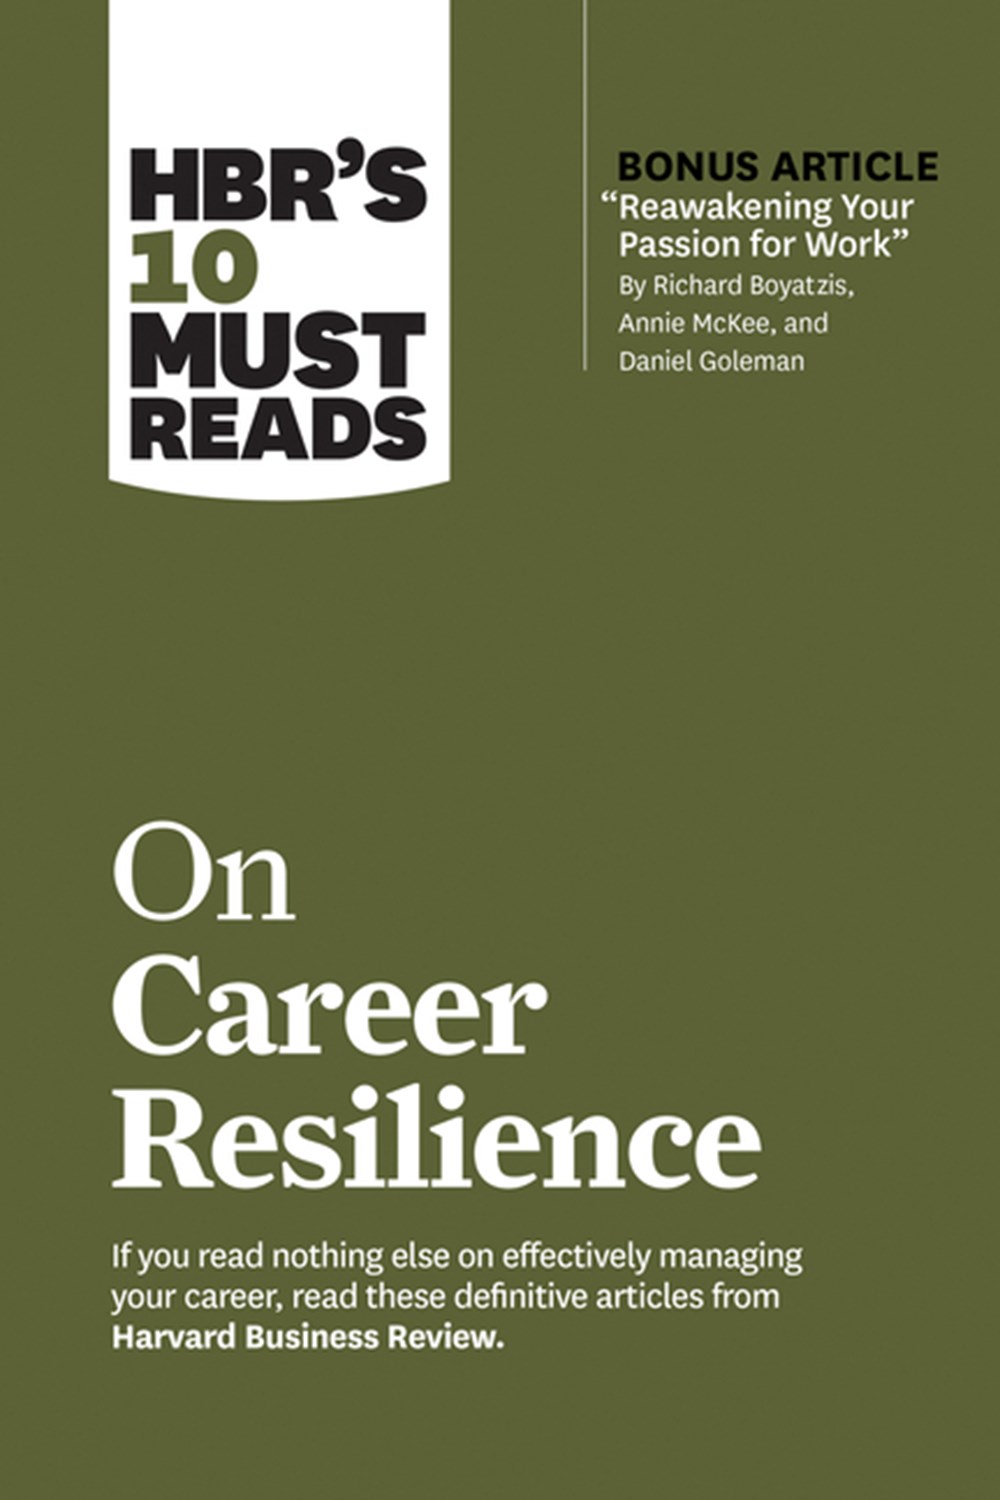 Hbr's 10 Must Reads on Career Resilience (with Bonus Article "reawakening Your Passion for Work" by 